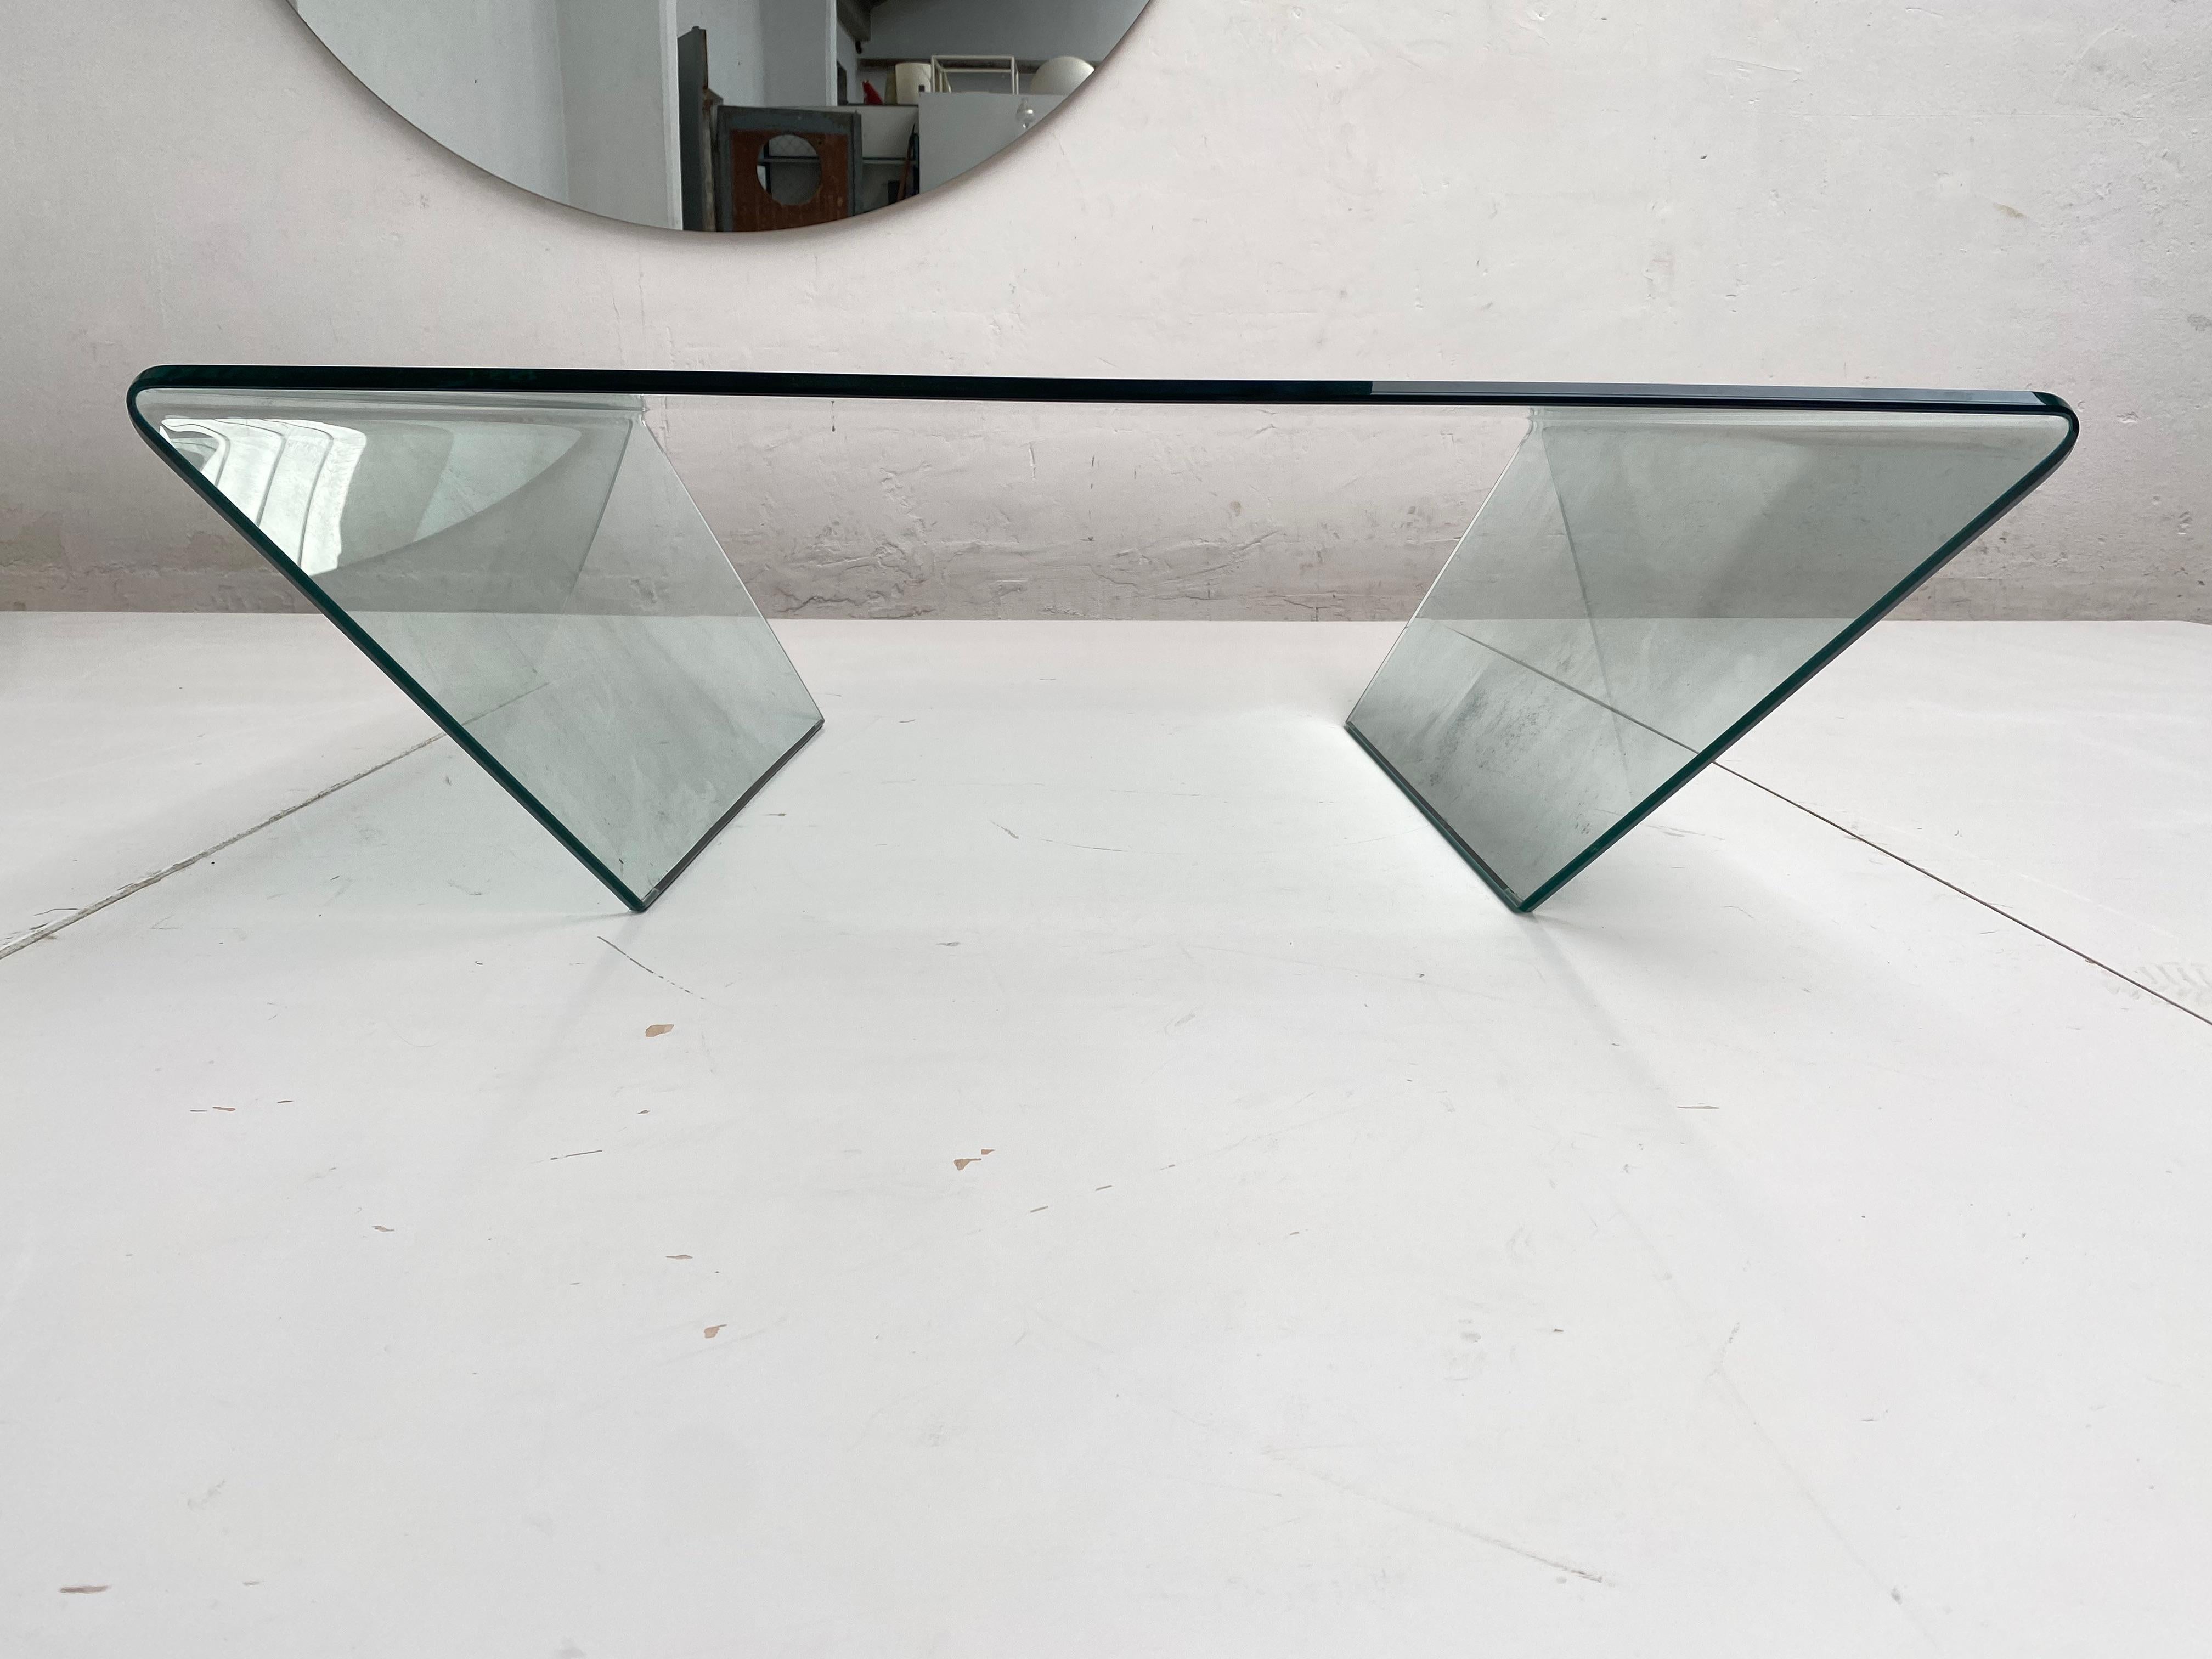 1980s Minimal design coffee table in tempered glass by Fiam Italy.